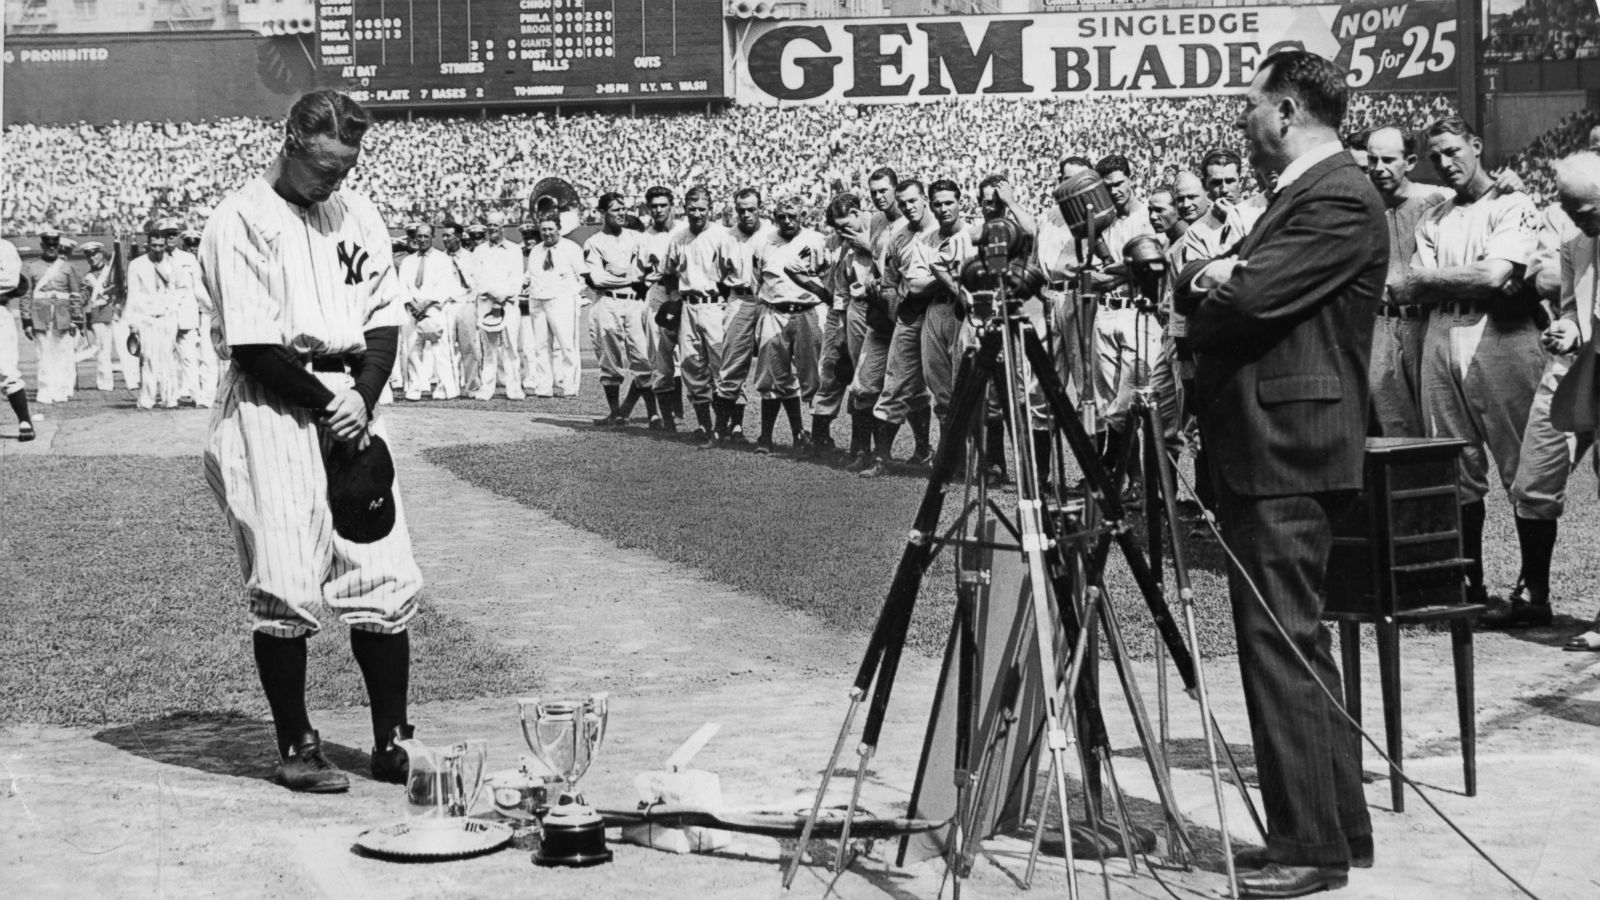 Lou Gehrig's Famous Speech Recreated by MLB Stars - ABC News